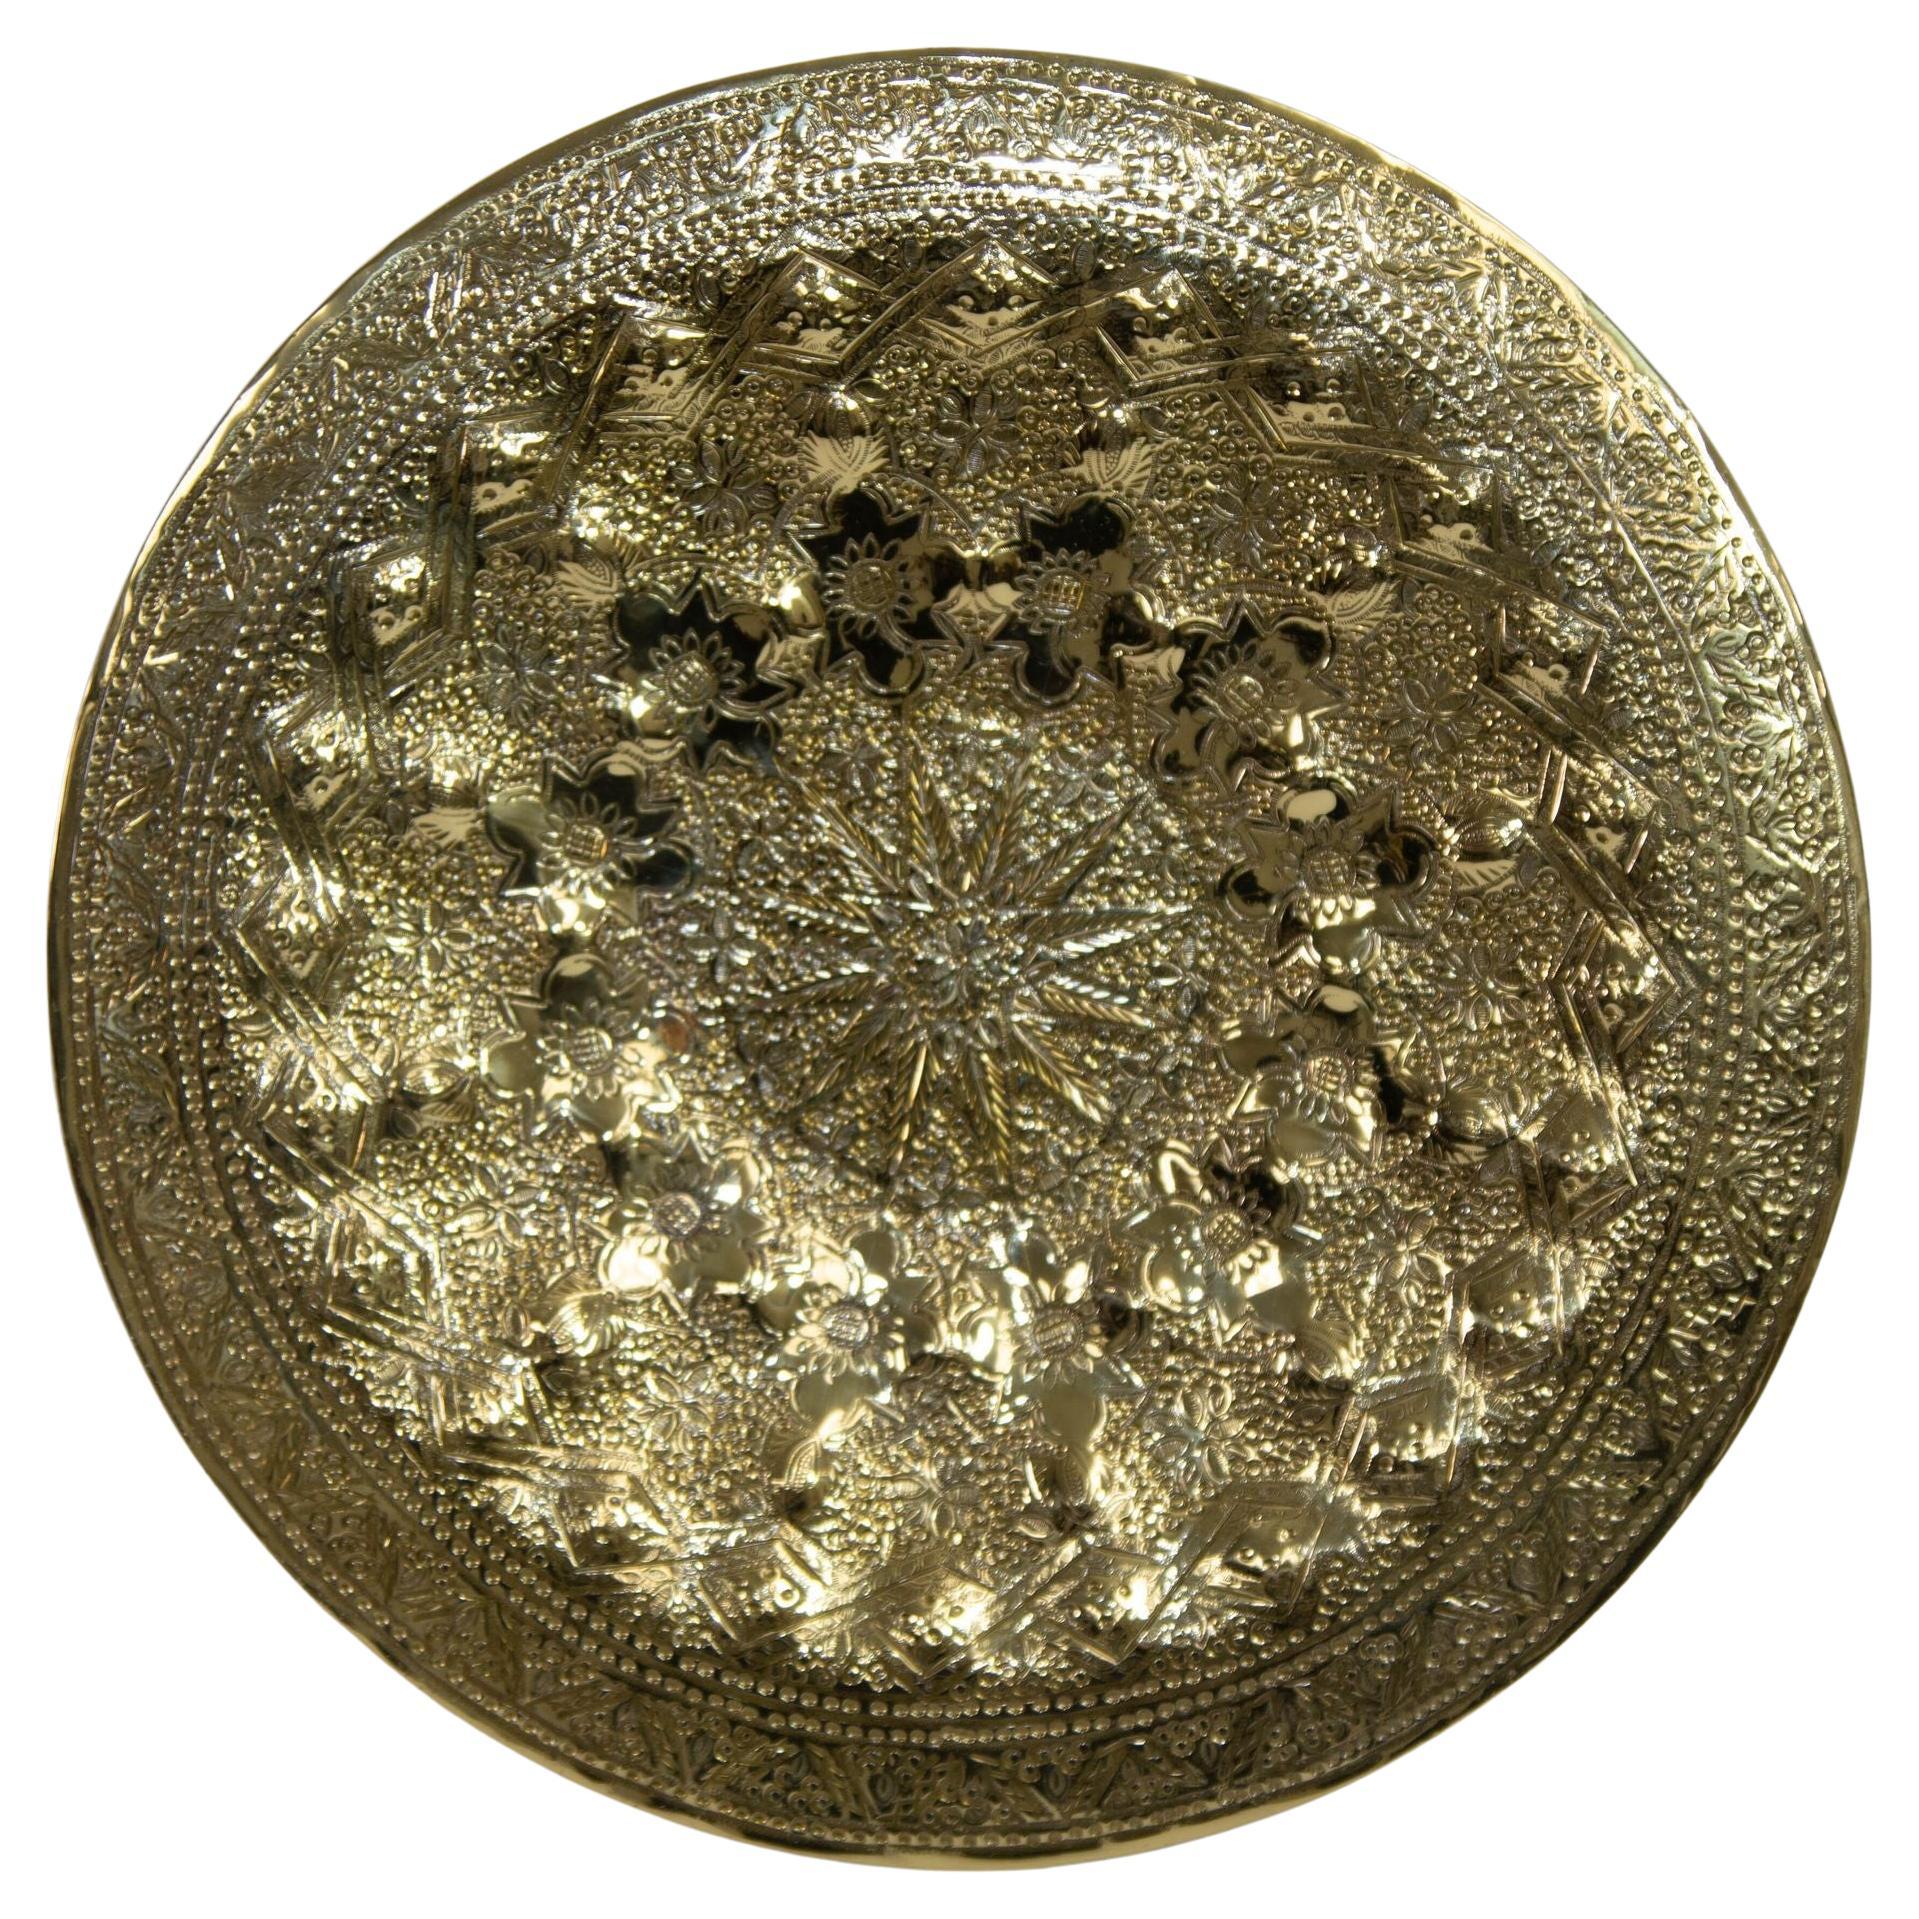 Islamic Persian Polished Brass Tray Collectible Metal Work Platter 10 inches D. For Sale